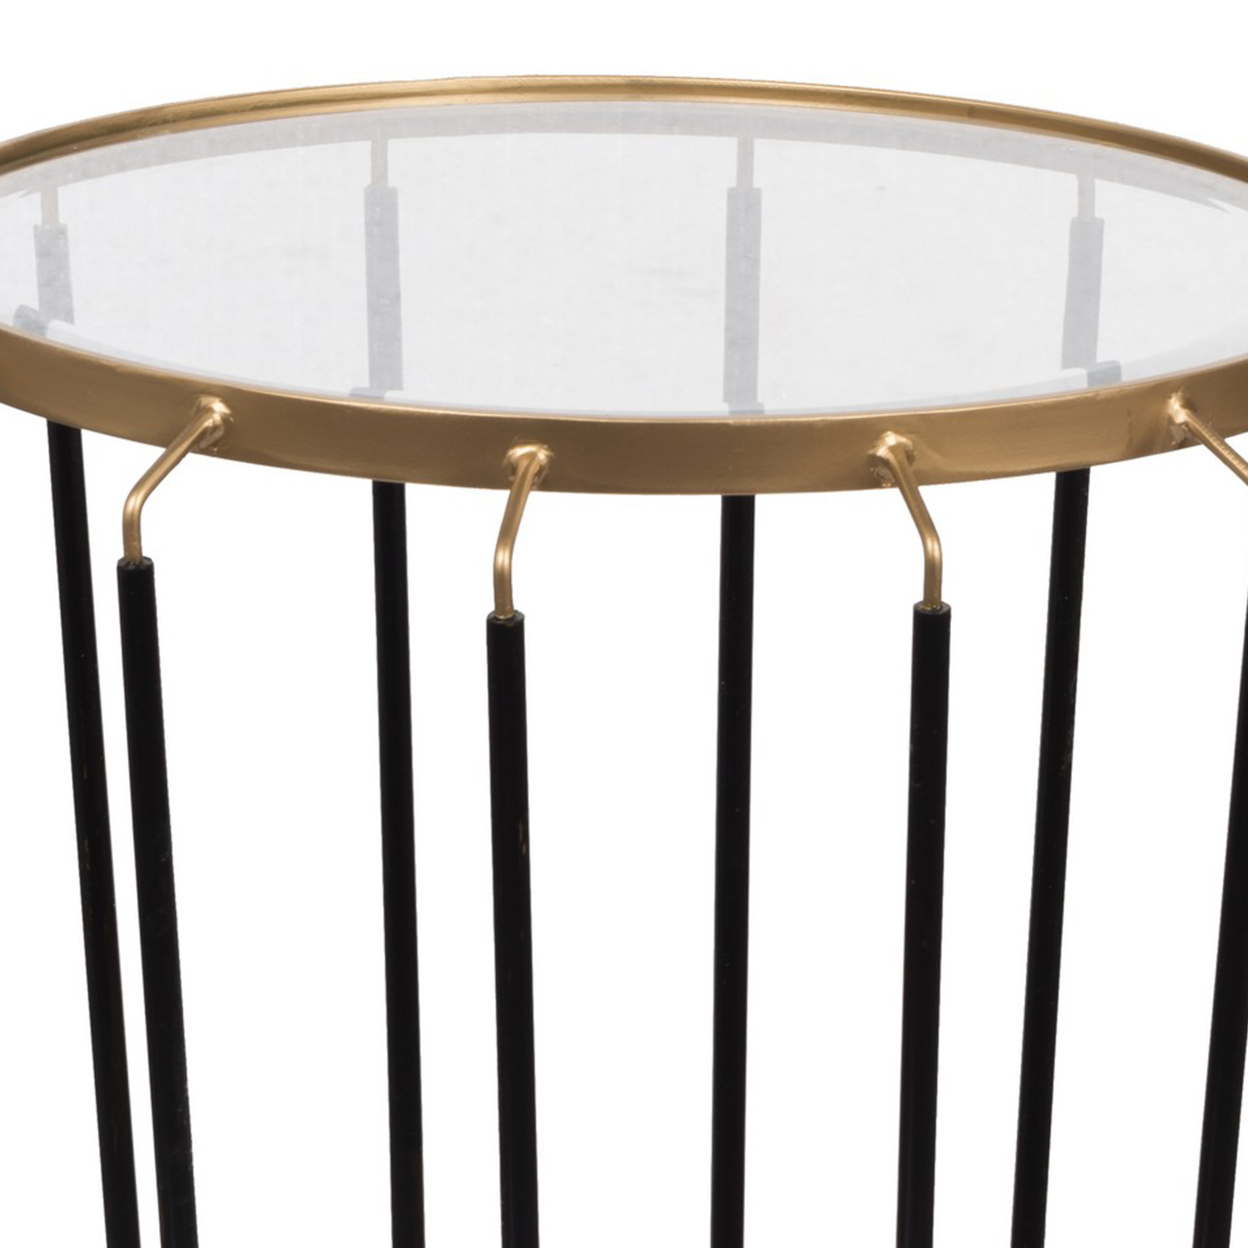 22 Inch Modern Iron Accent End Table, Cage Pattern, Glass Top, Gold, Black- Saltoro Sherpi